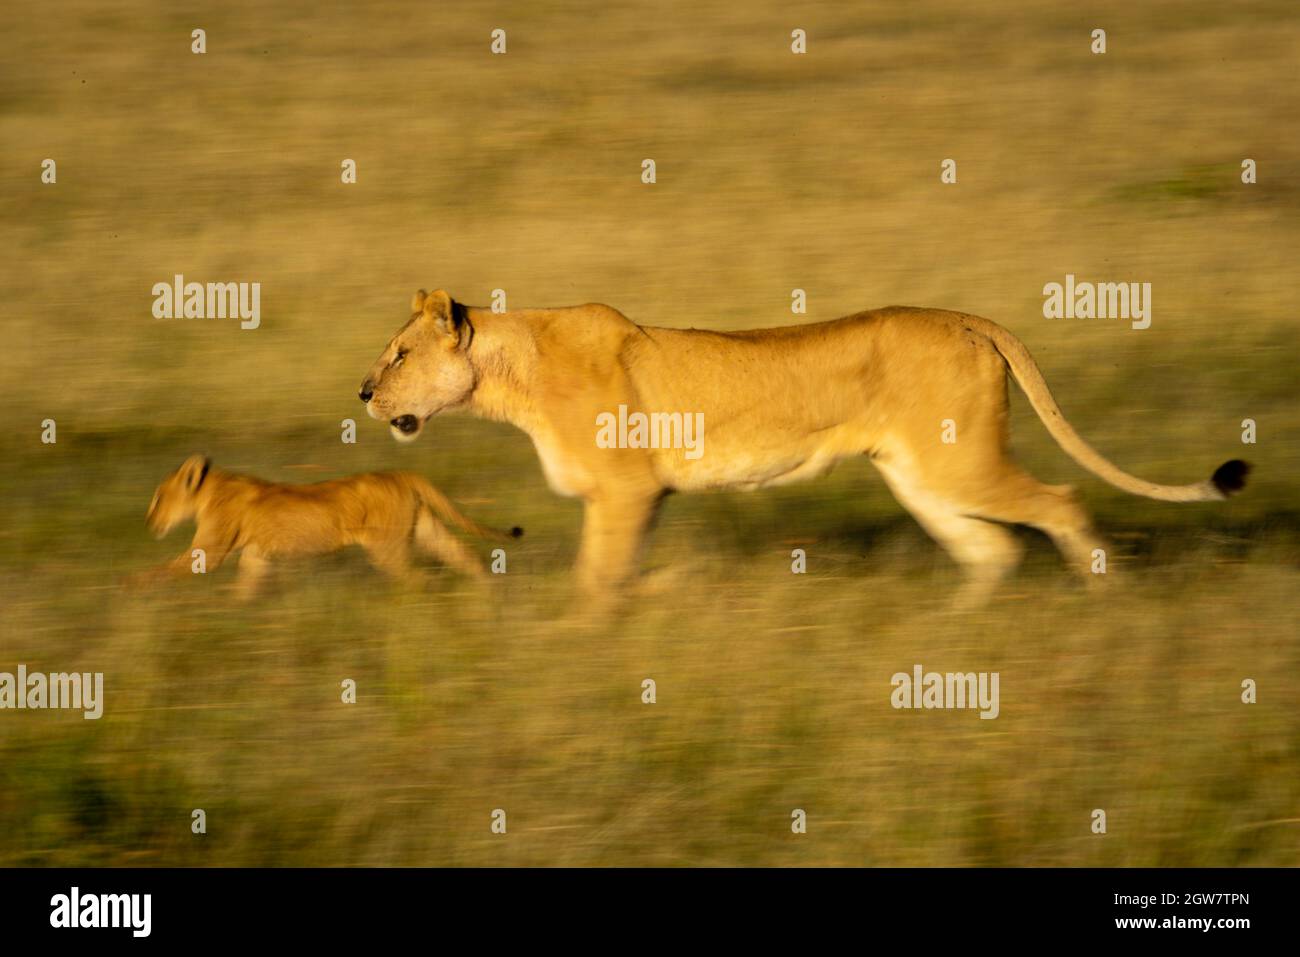 Slow Pan Of Lioness And Cub Crossing Savannah Stock Photo